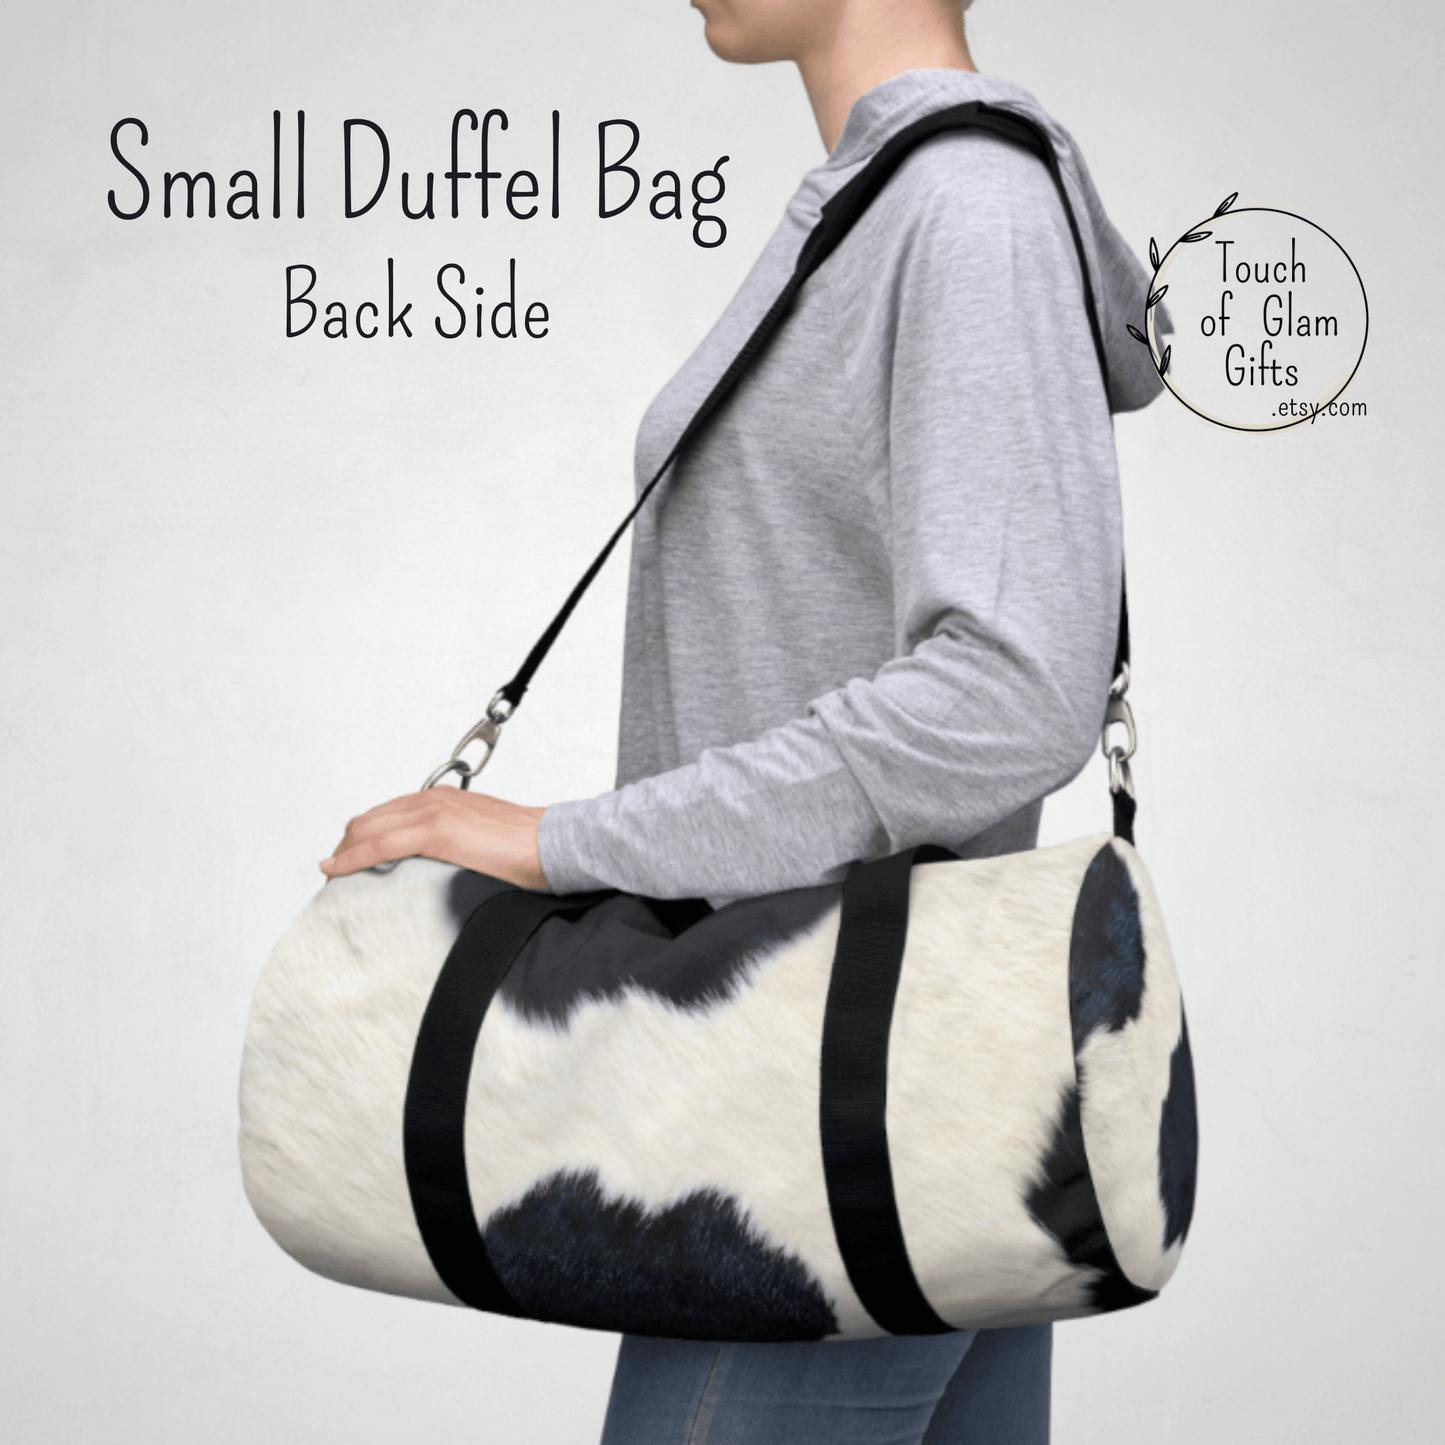 Our female model  has the small cow print duffel bag over her shoulder with the black straps and it shows the size of the smaller duffel bag.